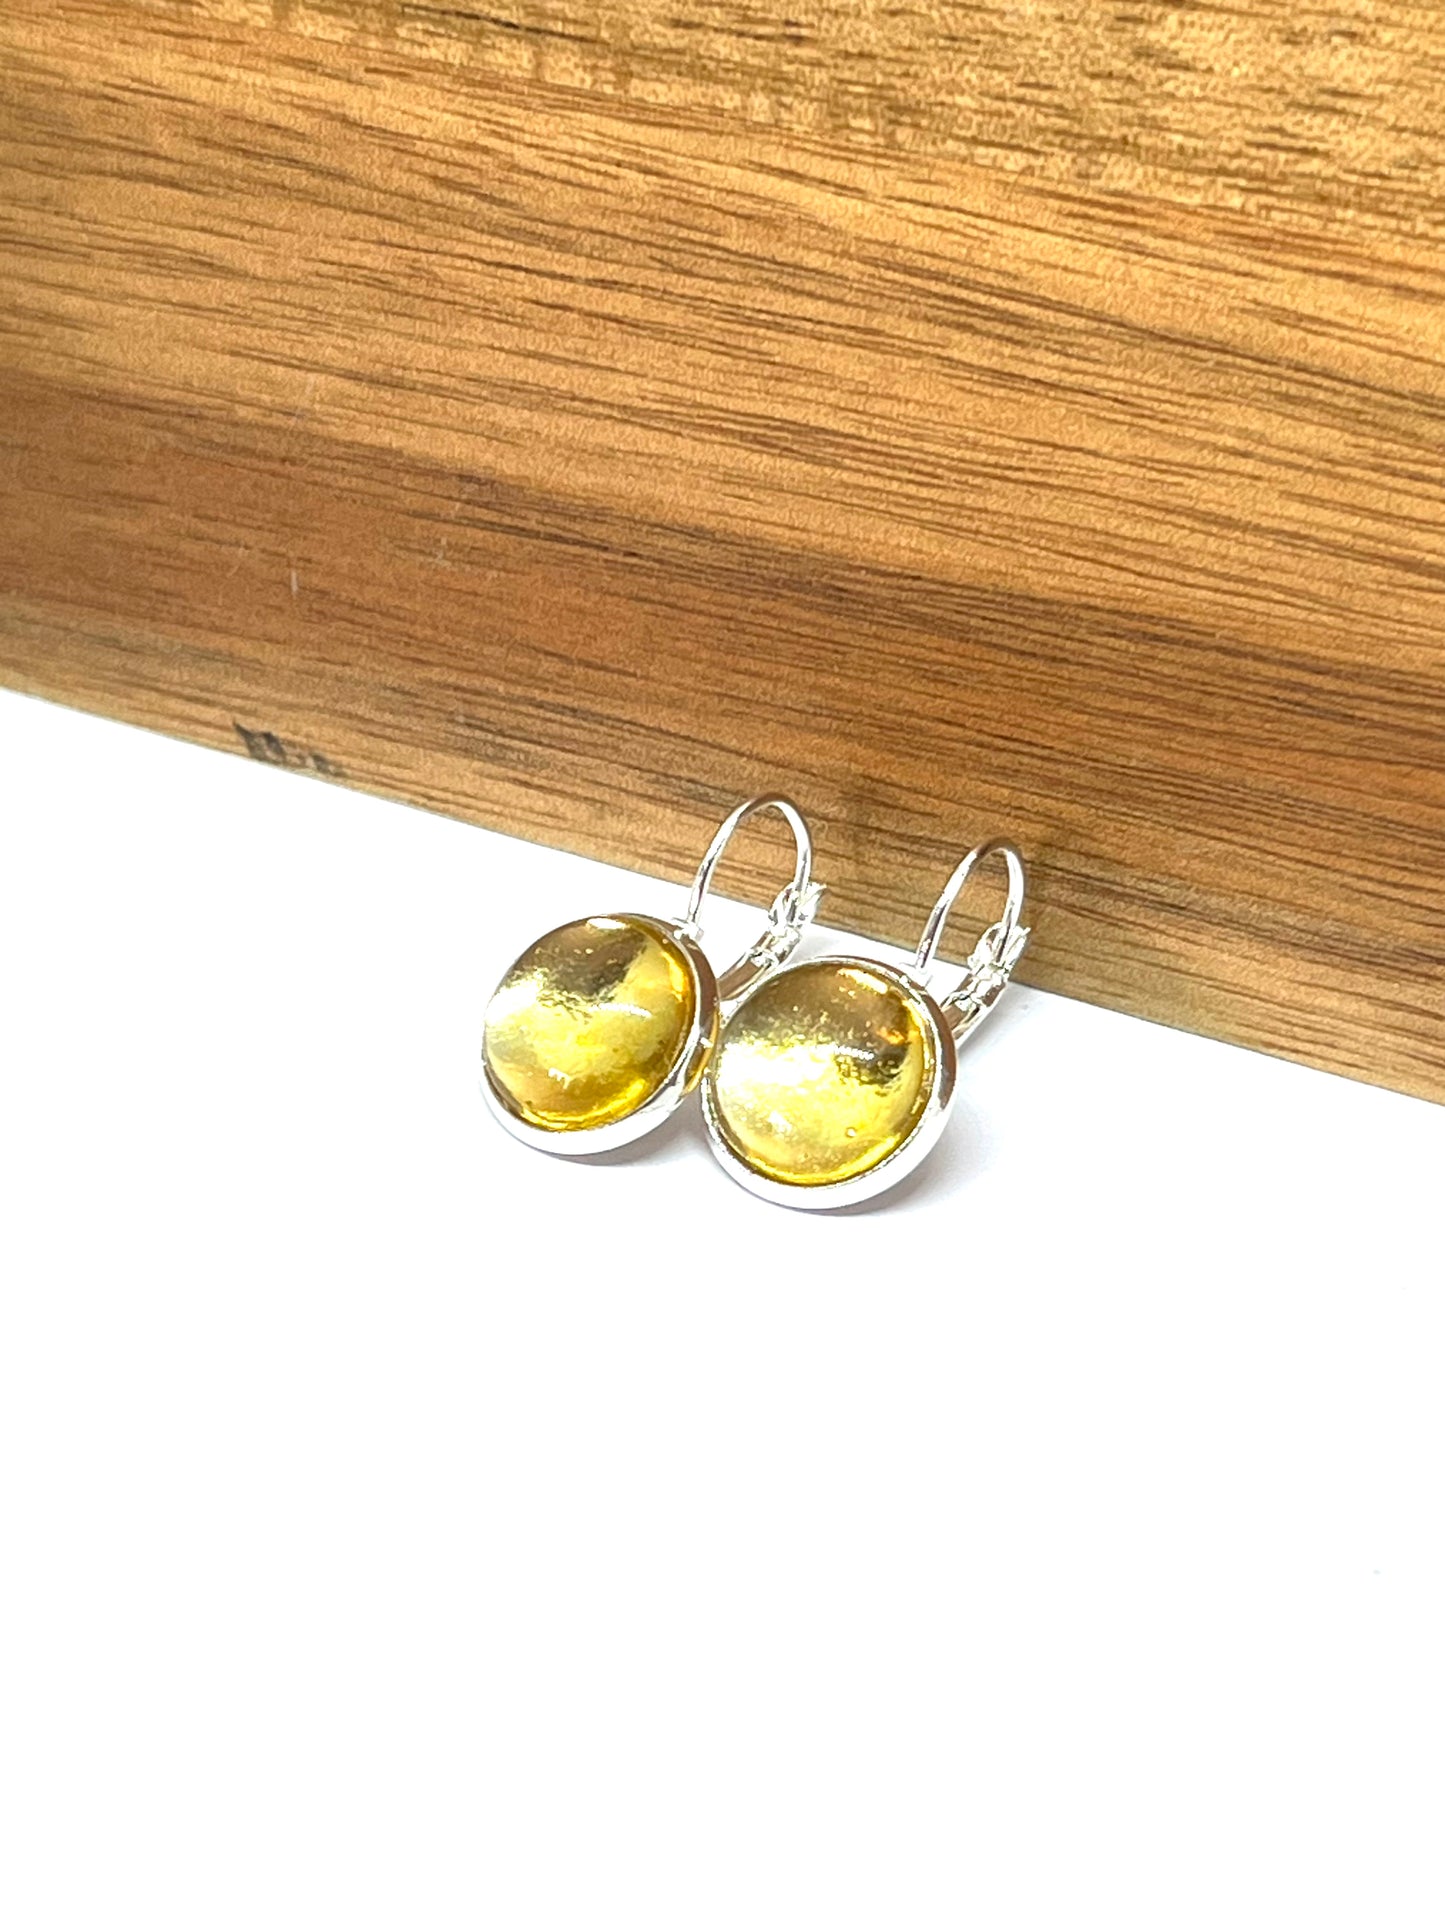 Gold glass dome earrings